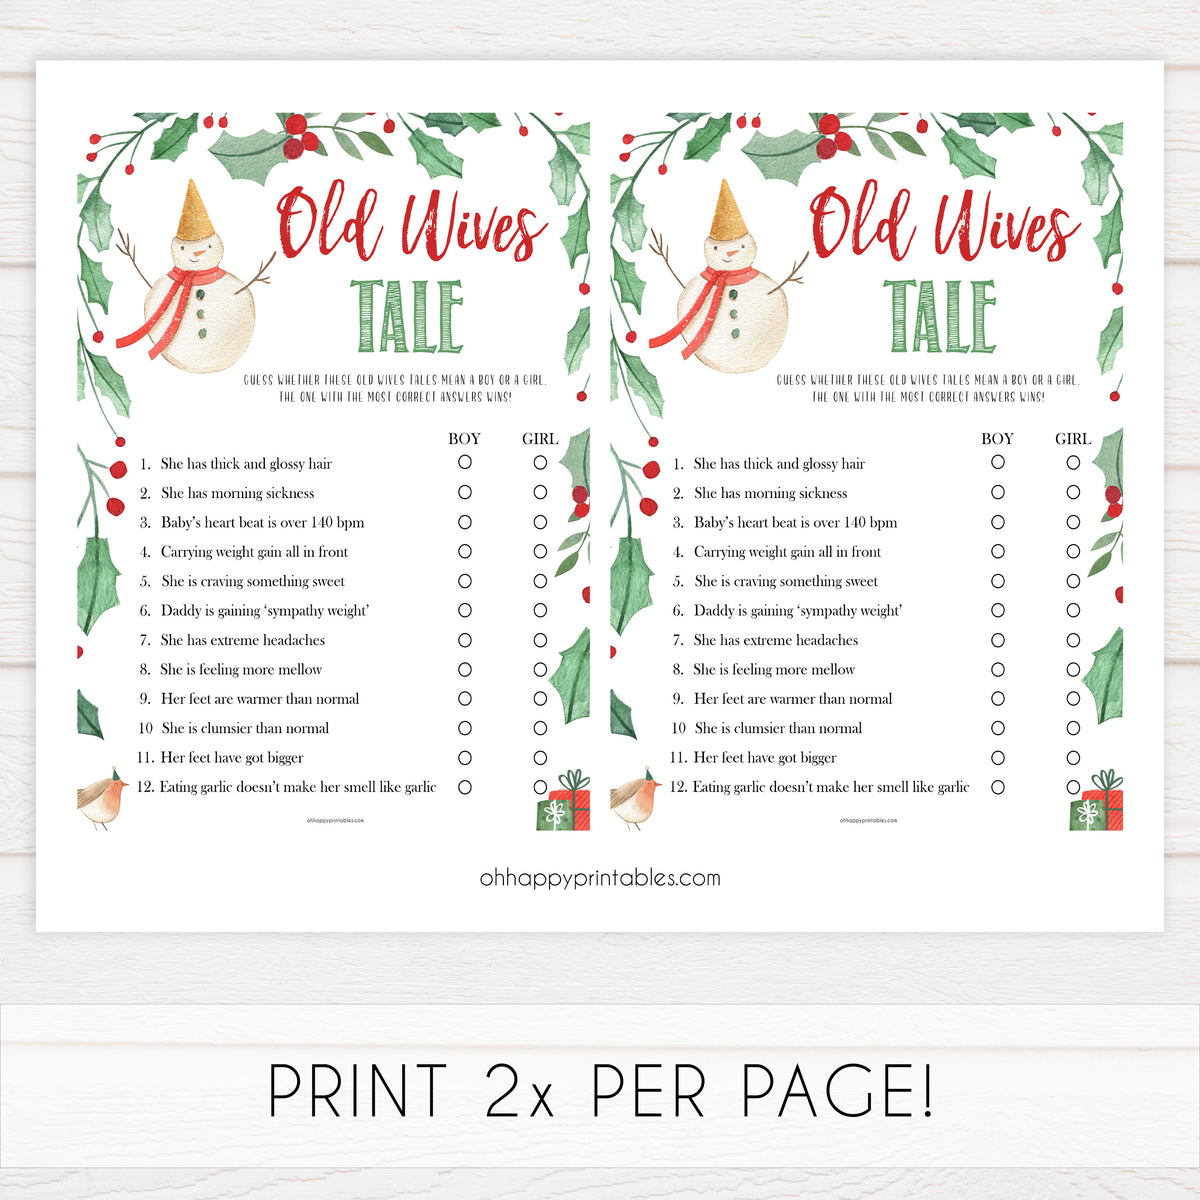 old-wives-tales-game-christmas-printable-baby-games-ohhappyprintables